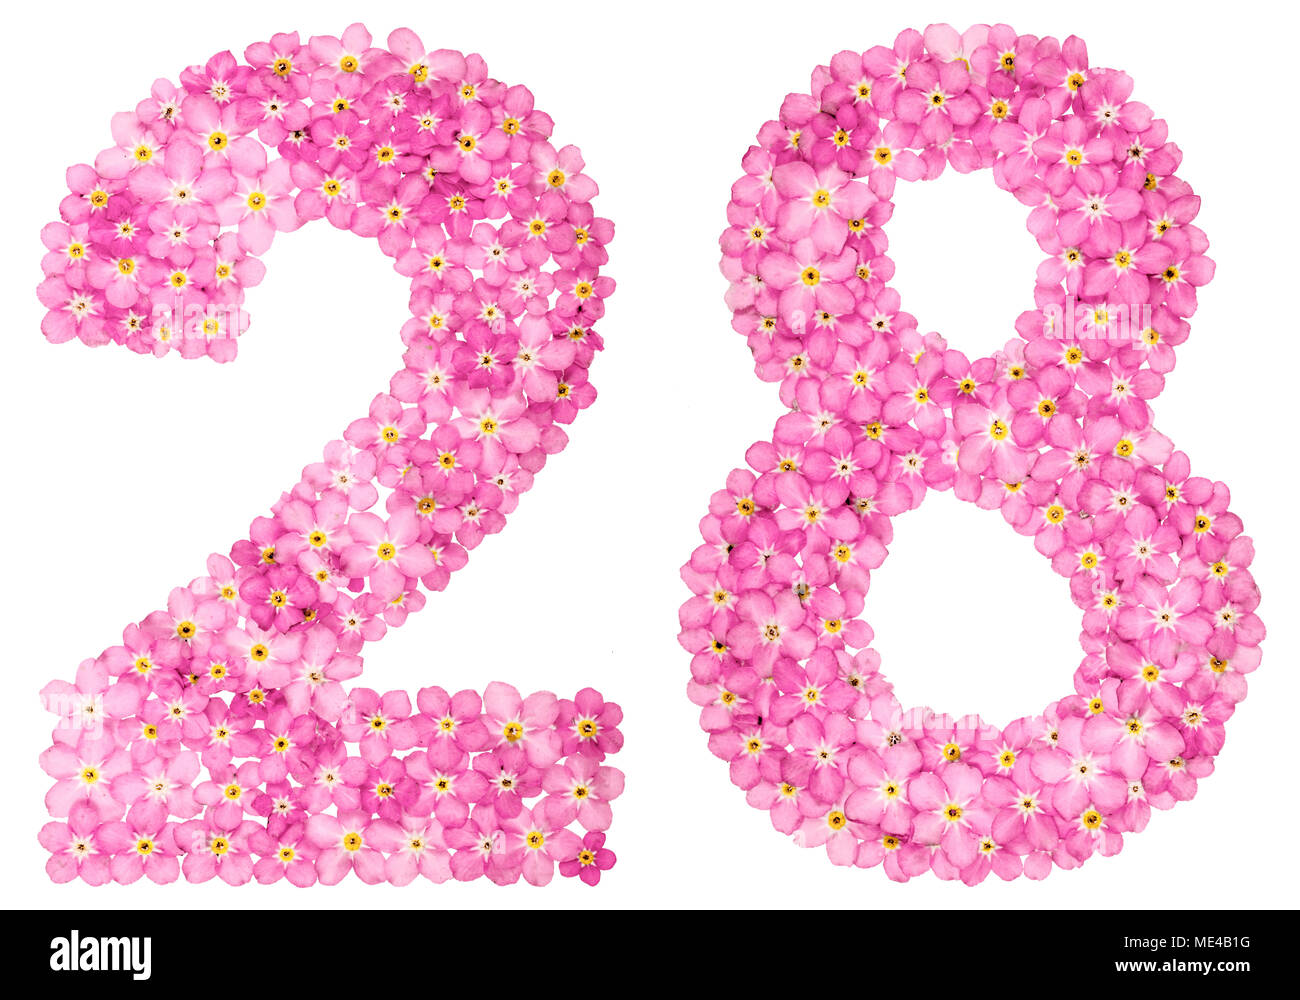 Arabic numeral 28, twenty eight, from pink forget-me-not flowers